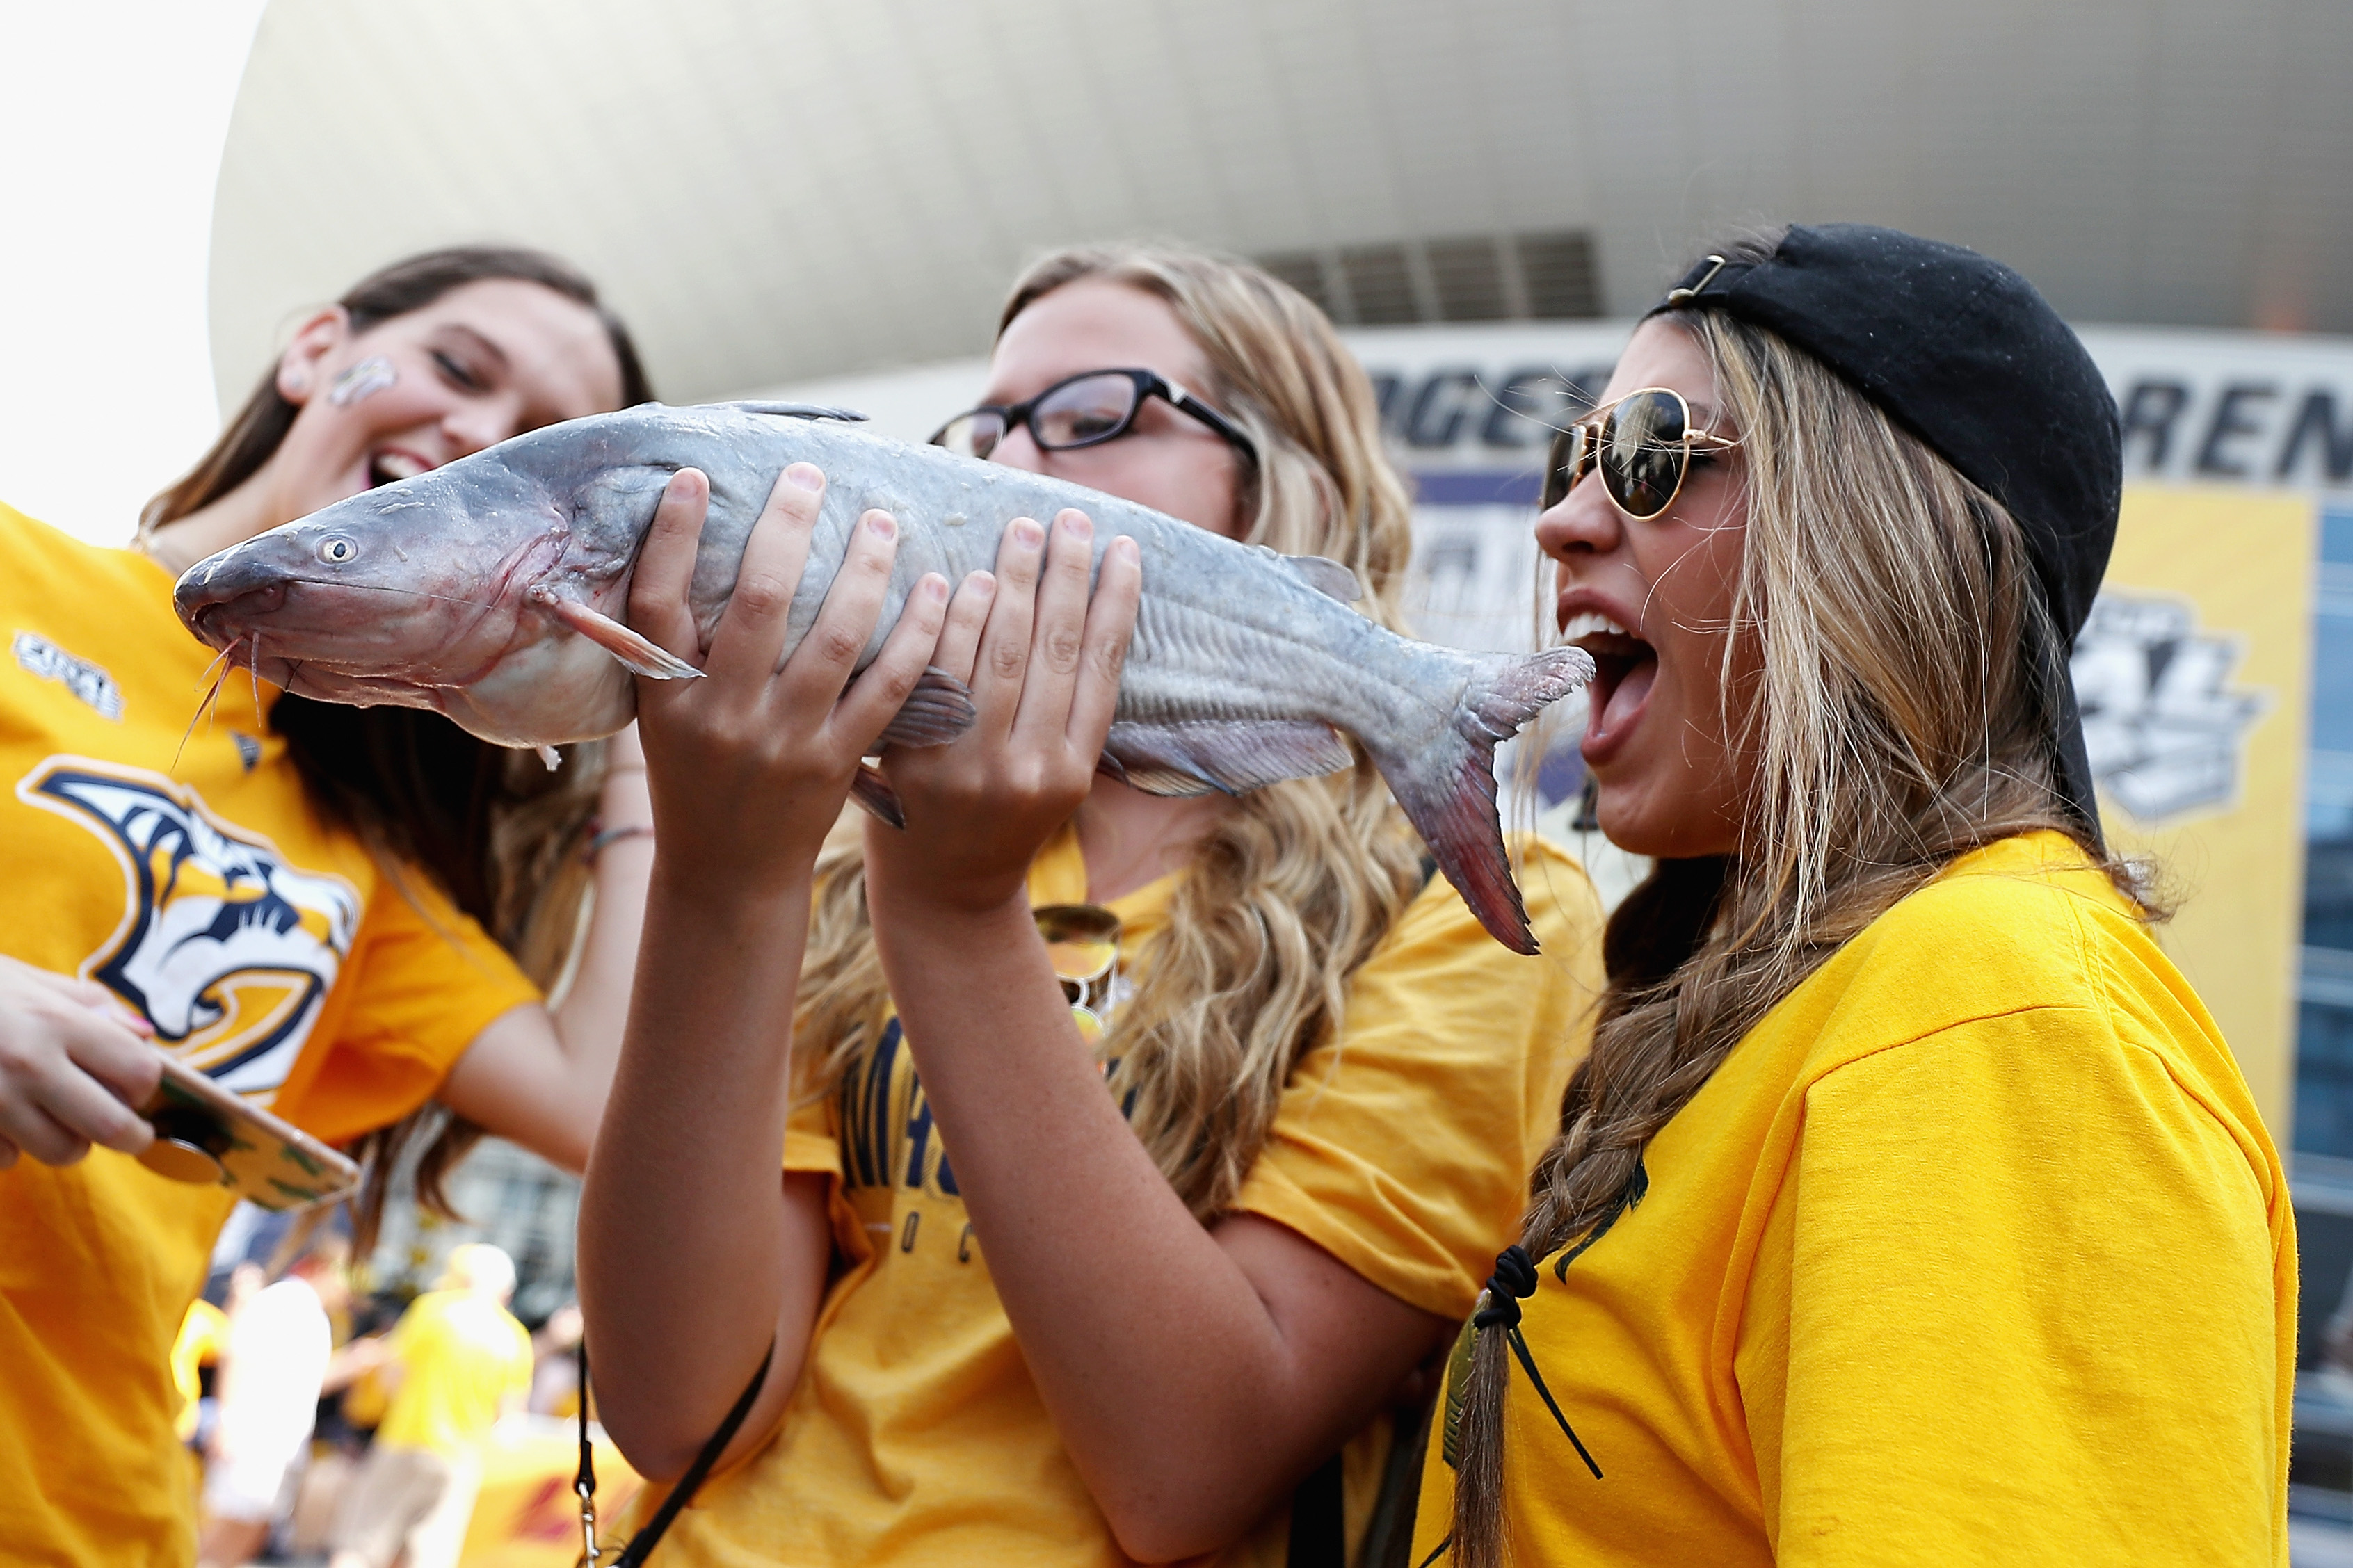 Predators fan has criminal charges dismissed over Game 1 catfish toss – New  York Daily News